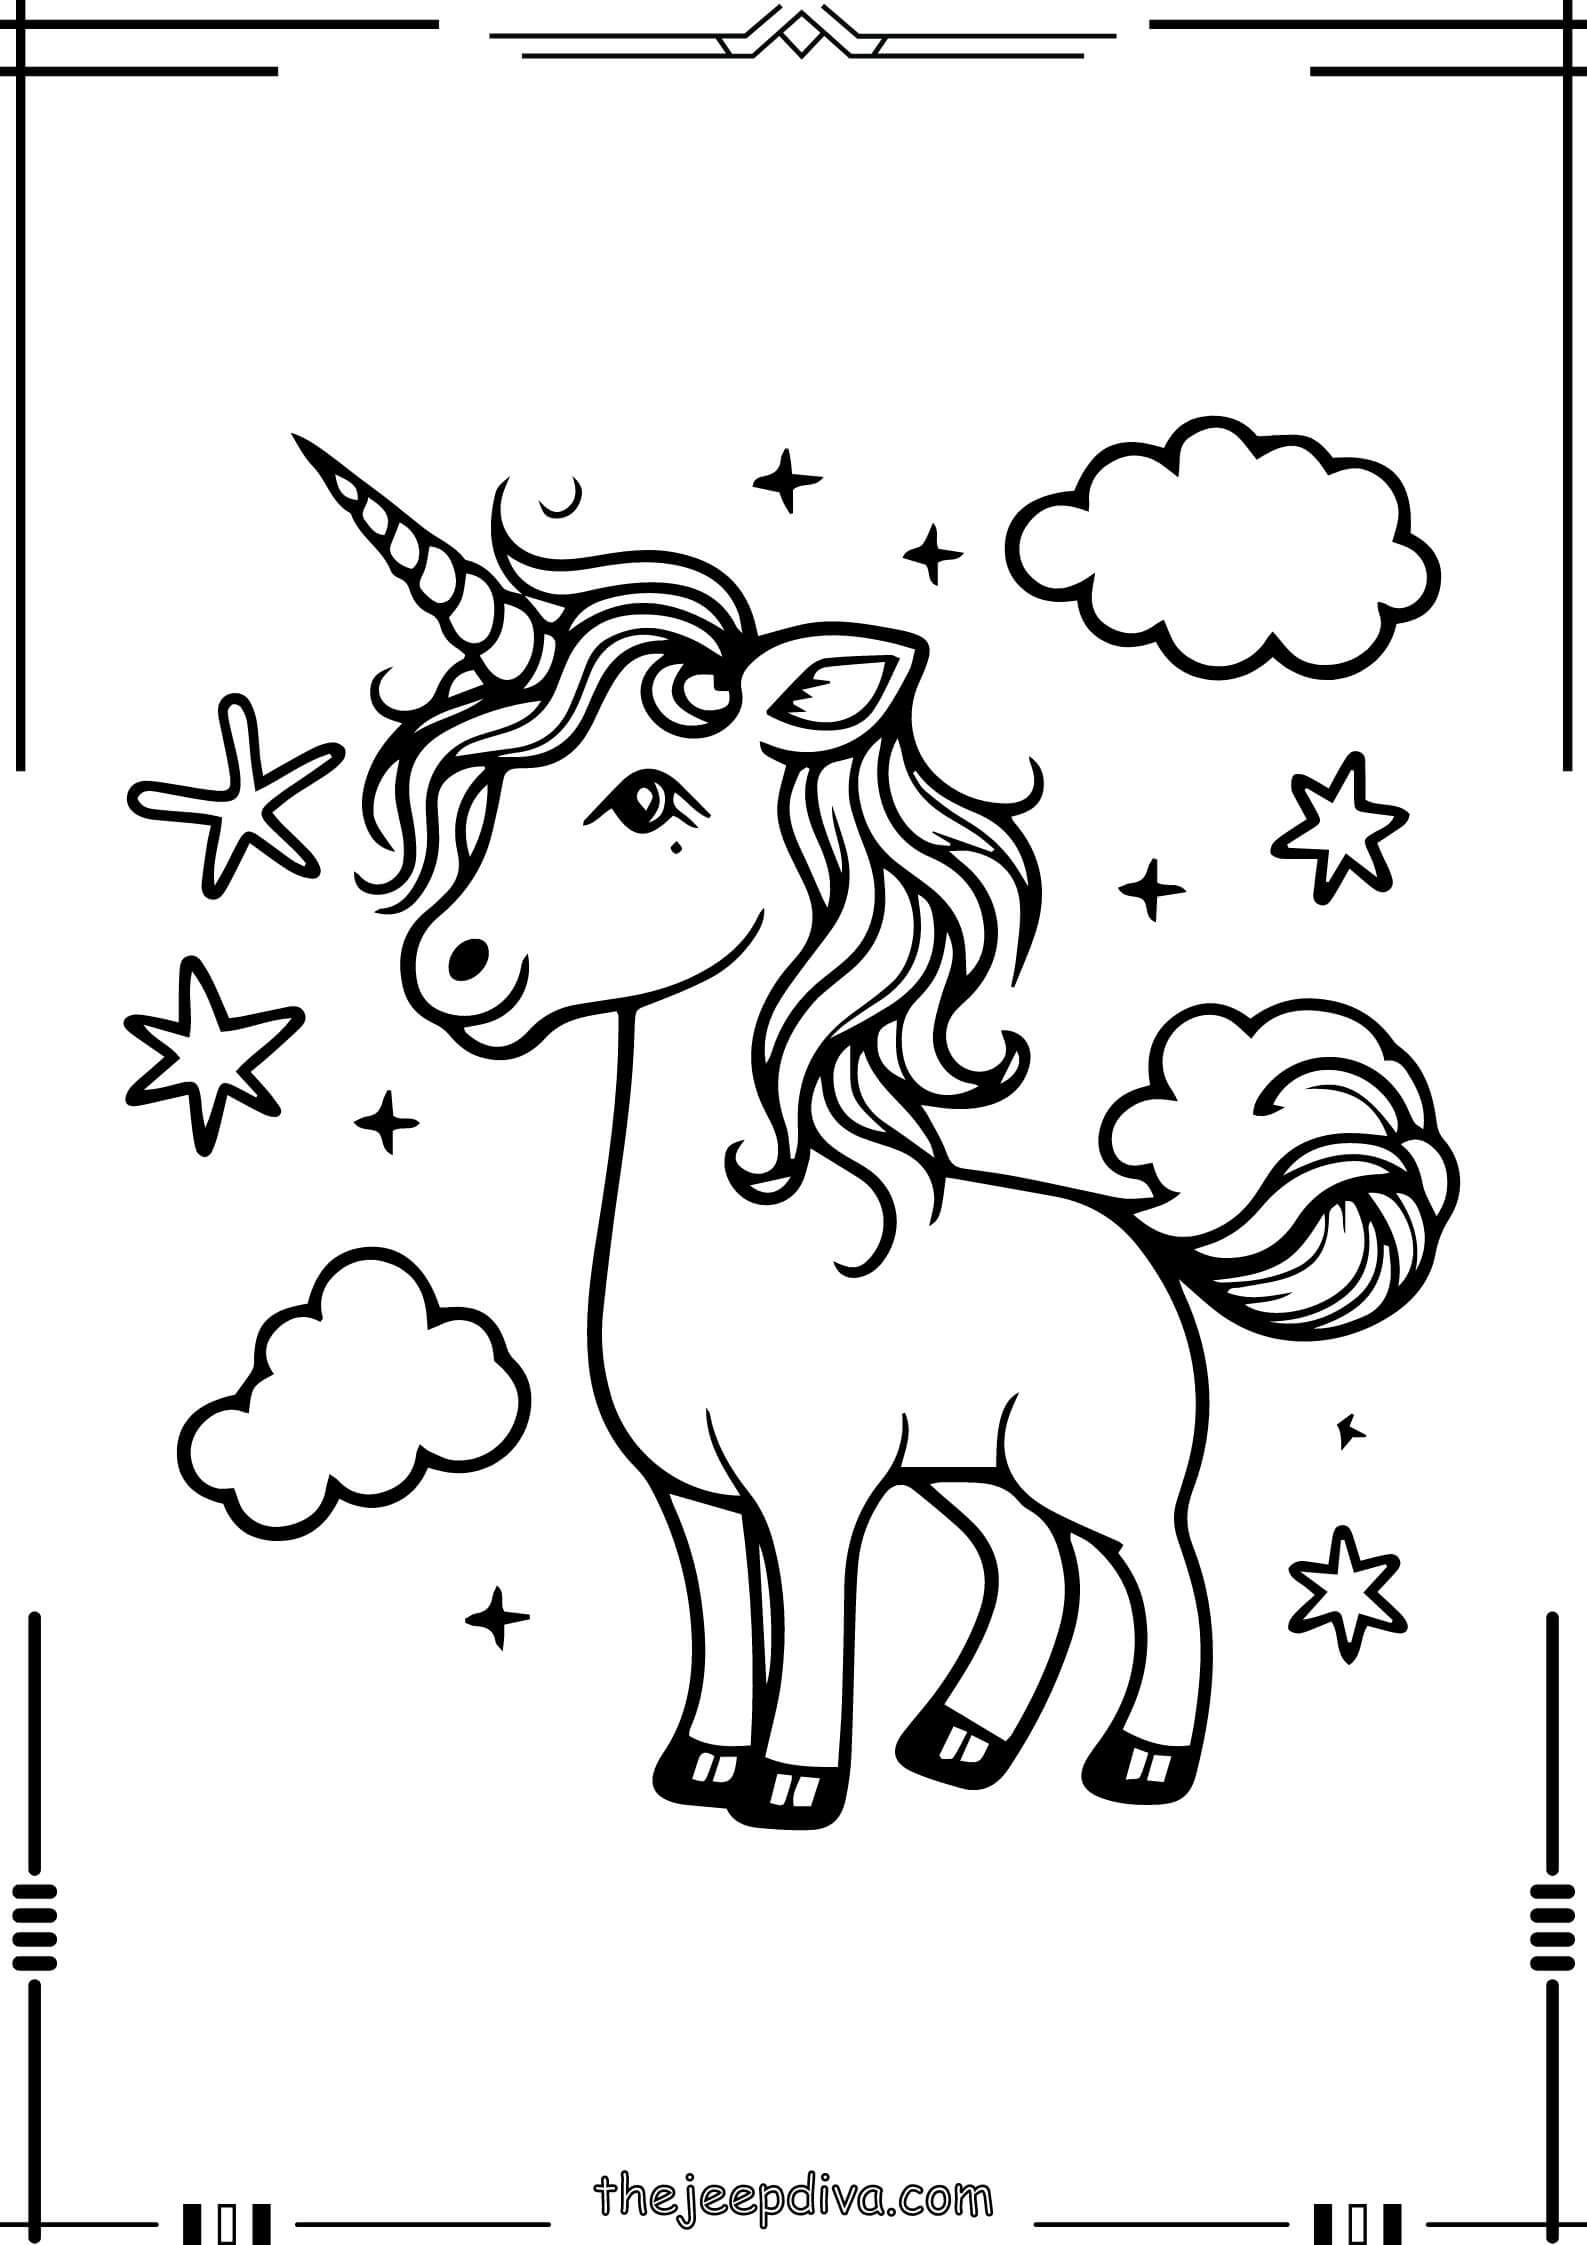 unicorn-coloring-page-easy-15